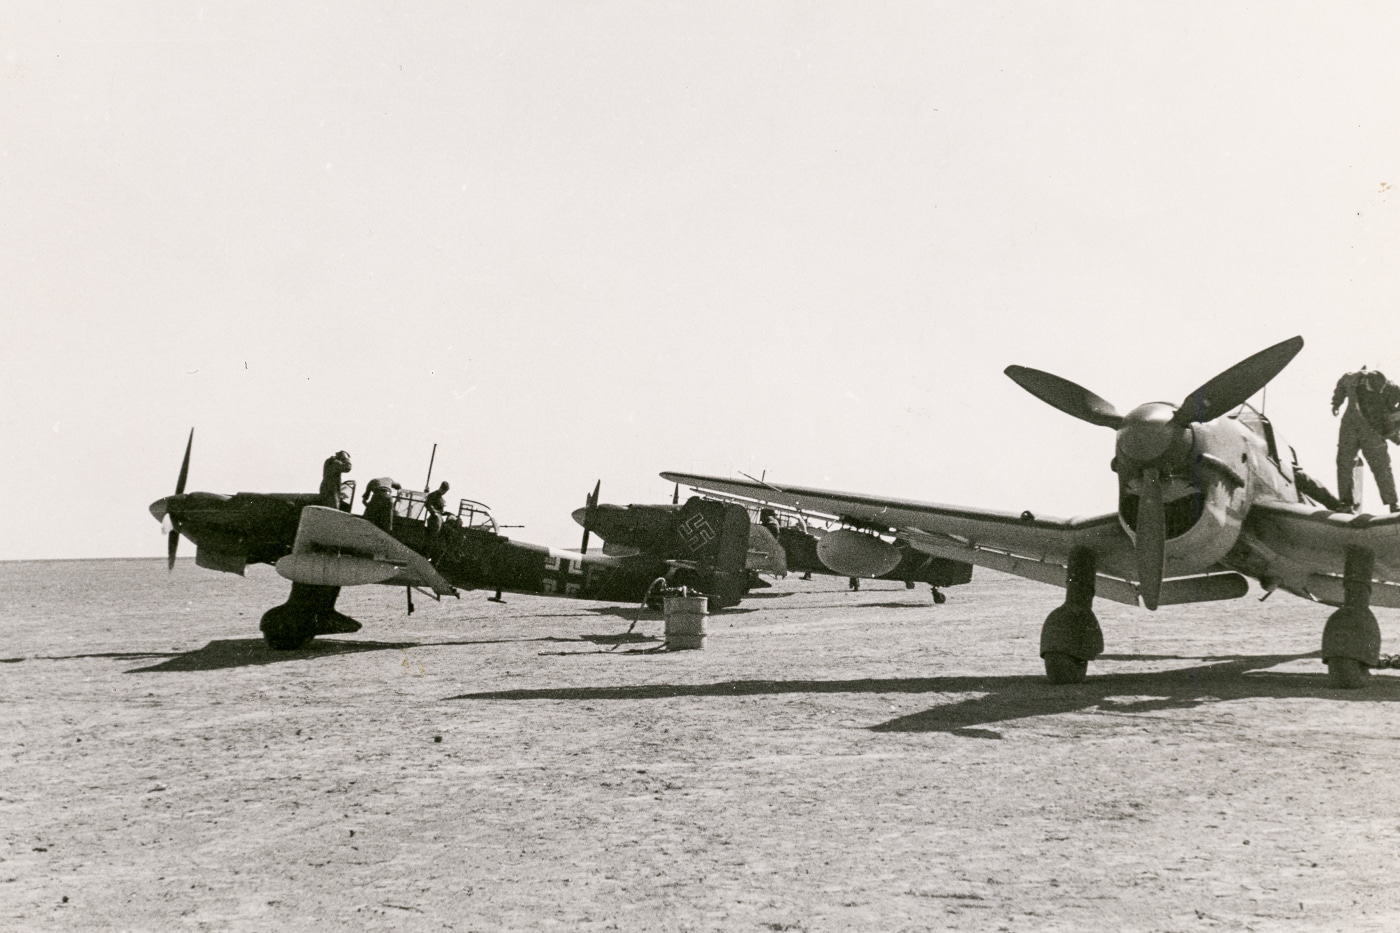 In this digital image, we see several Stukas on the flight line that are being prepared for combat in France. You can see the rear gunner entering the cockpit of one aircraft. His mission was to keep the RAF pilots off of the plane when the Messerschmitt Bf 109 fighters were unavailable. When running a dive-bomb mission, the planes were particularly vulnerable to hits on the fuselage - a point made by Von Richthofen during pre-war strategy sessions.